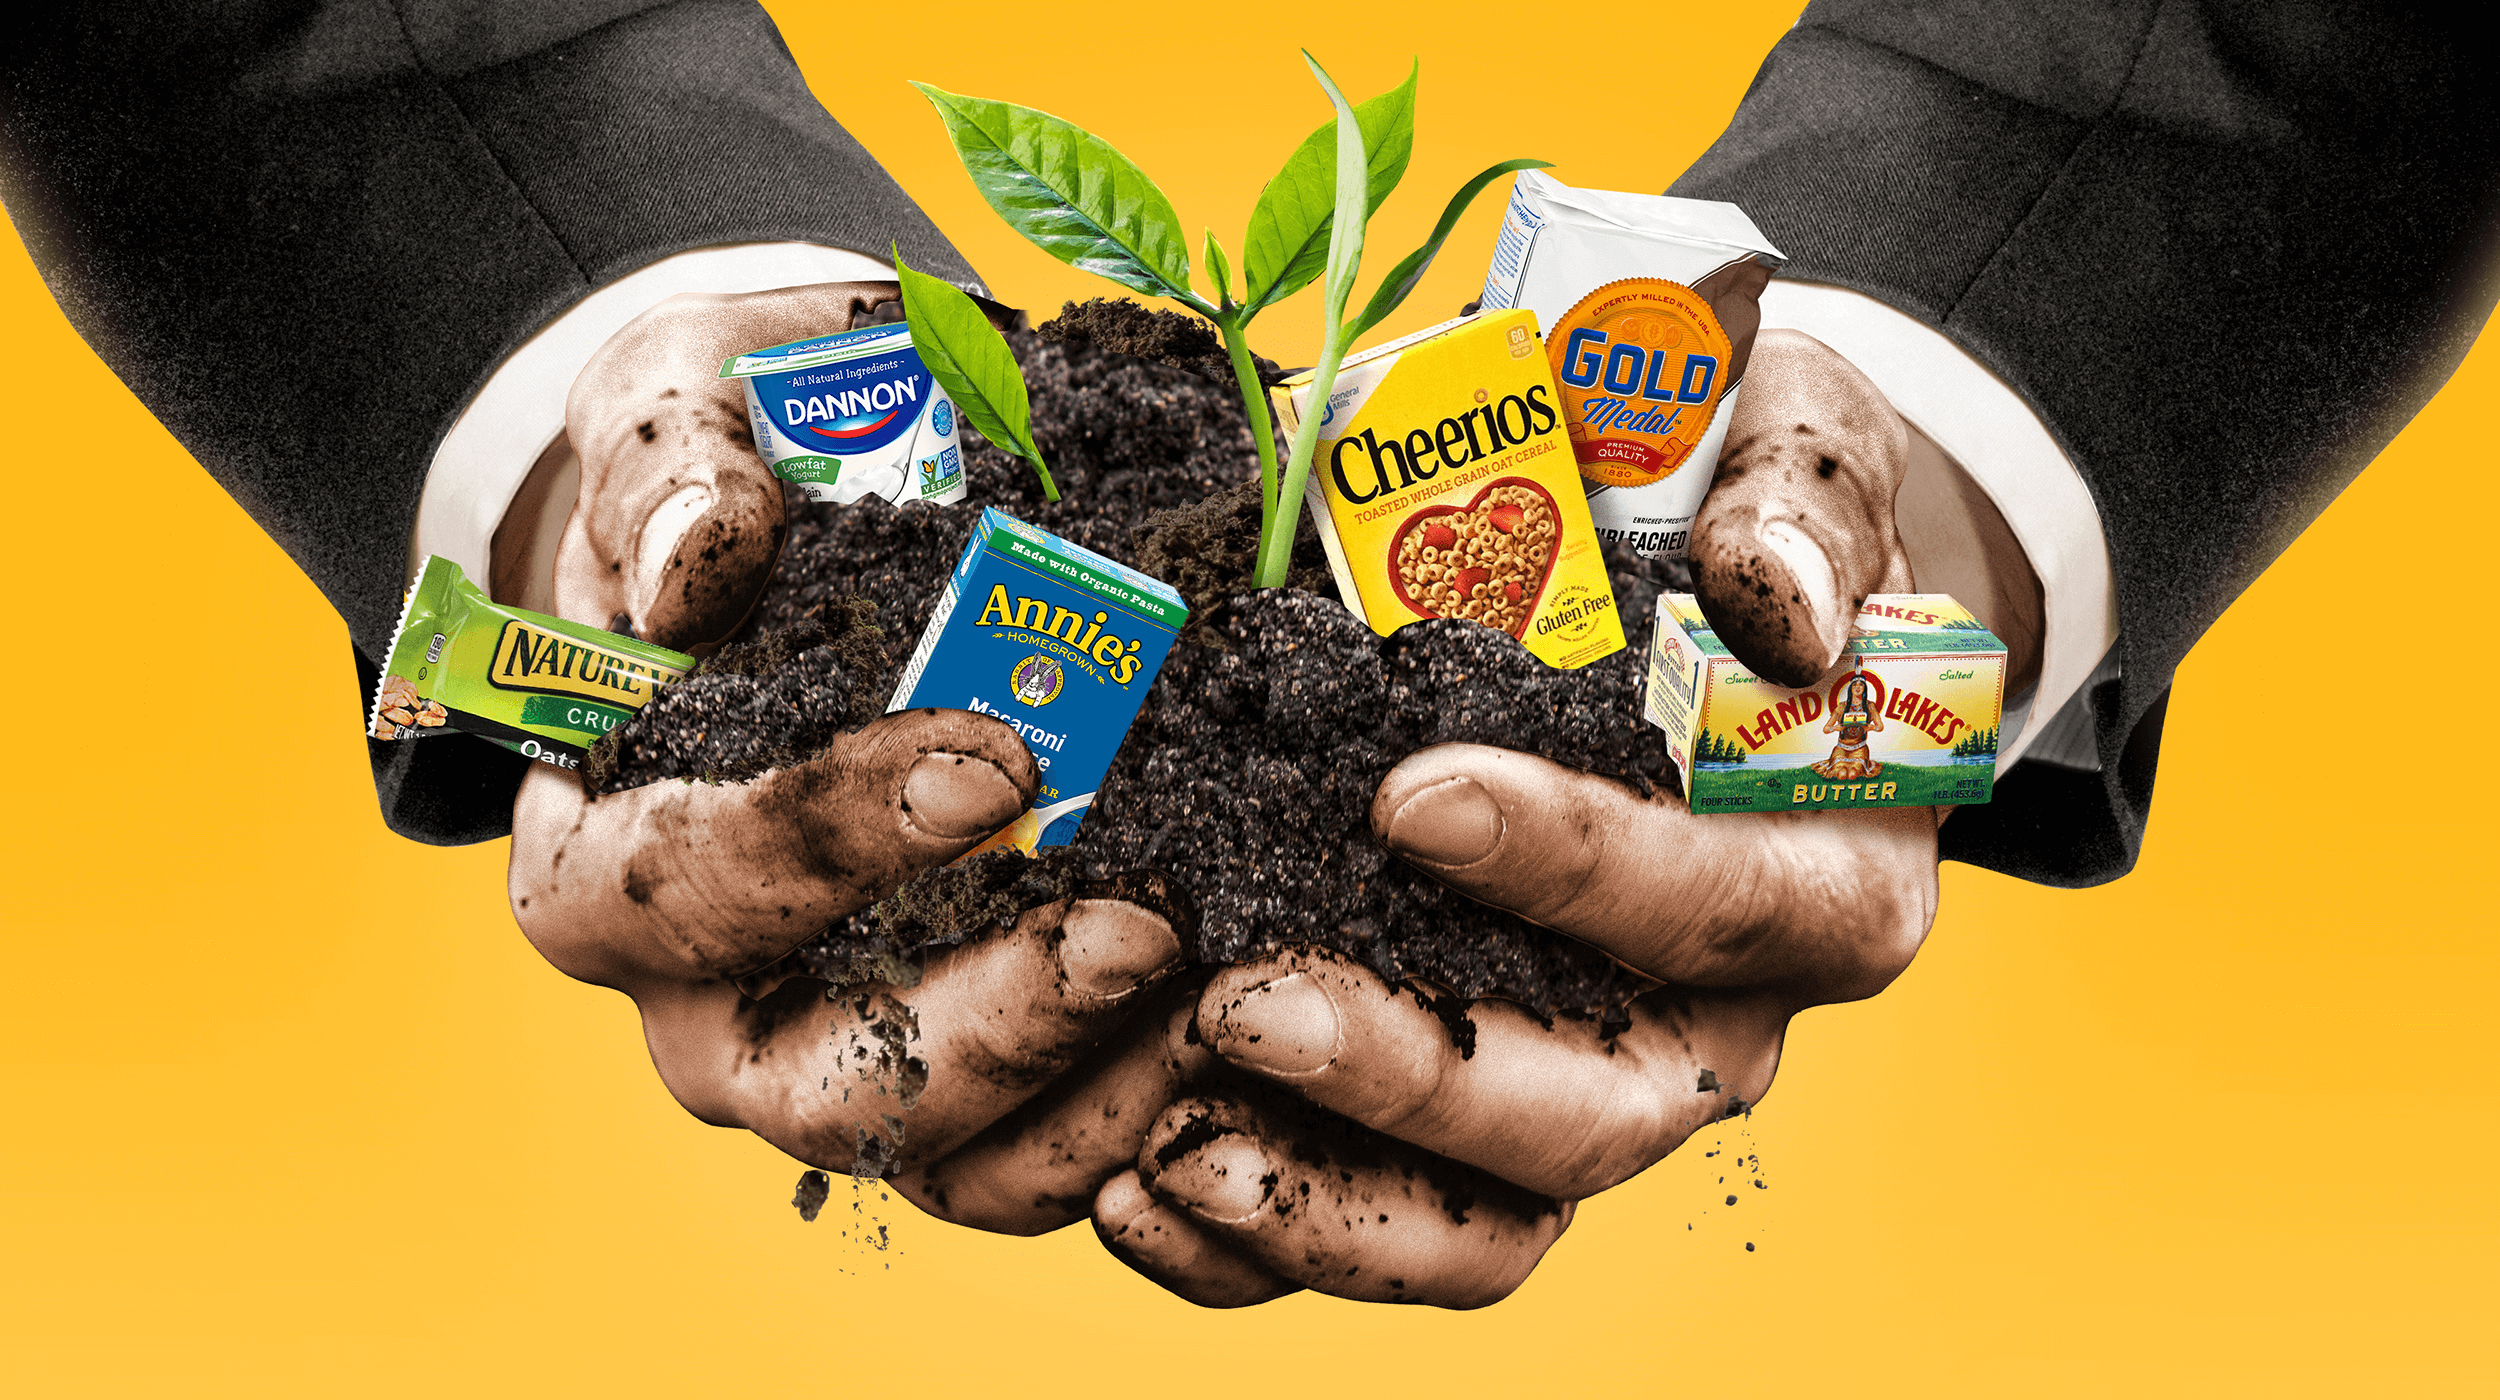 Nestle, General Mills, PepsiCo and other food companies have pledged support for regenerative agriculture. Is this a greenwashing campaign? – Genetic Literacy Project